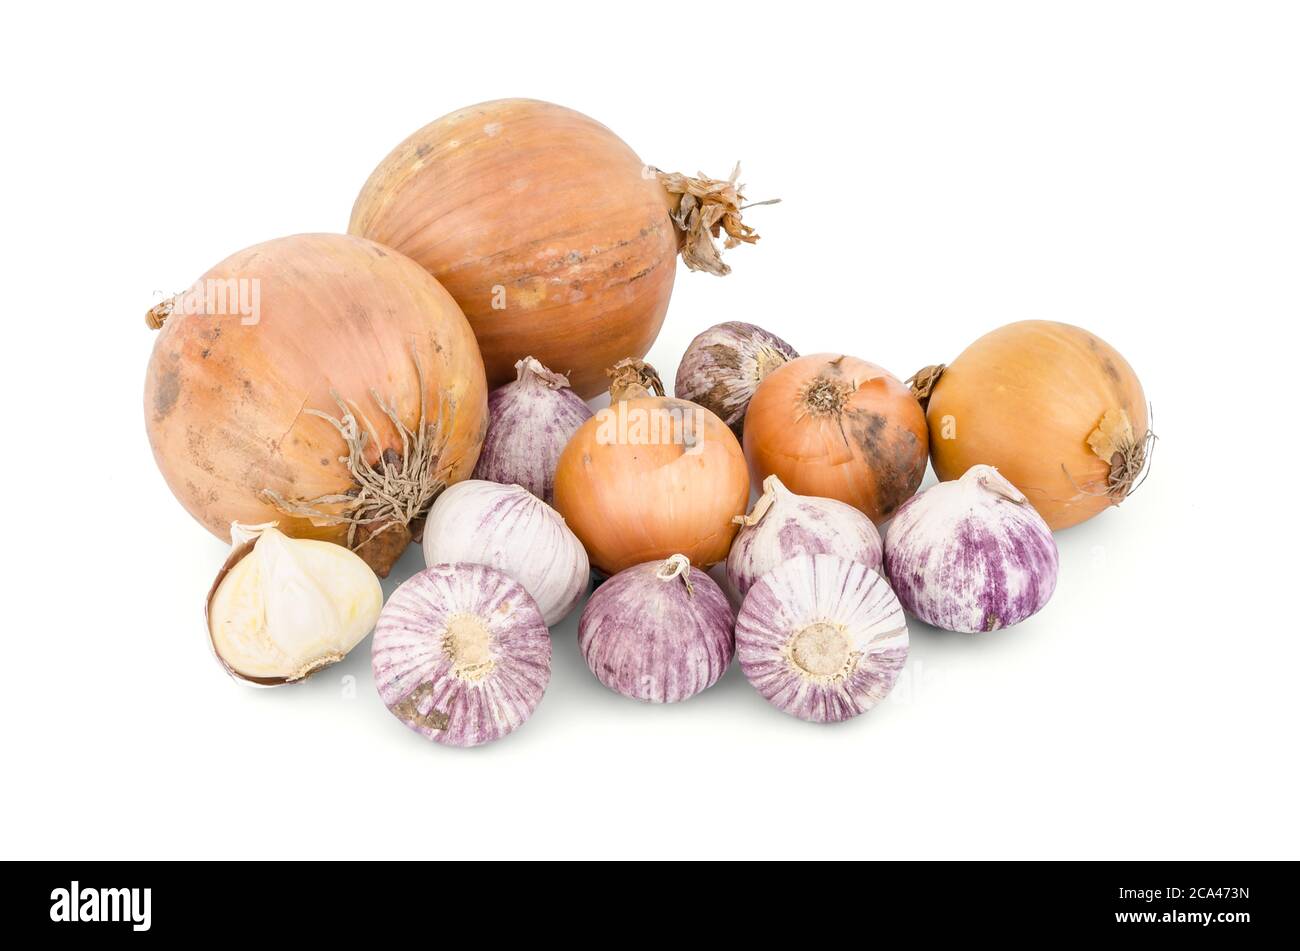 Garlics and Onions isolated on white background. Stock Photo